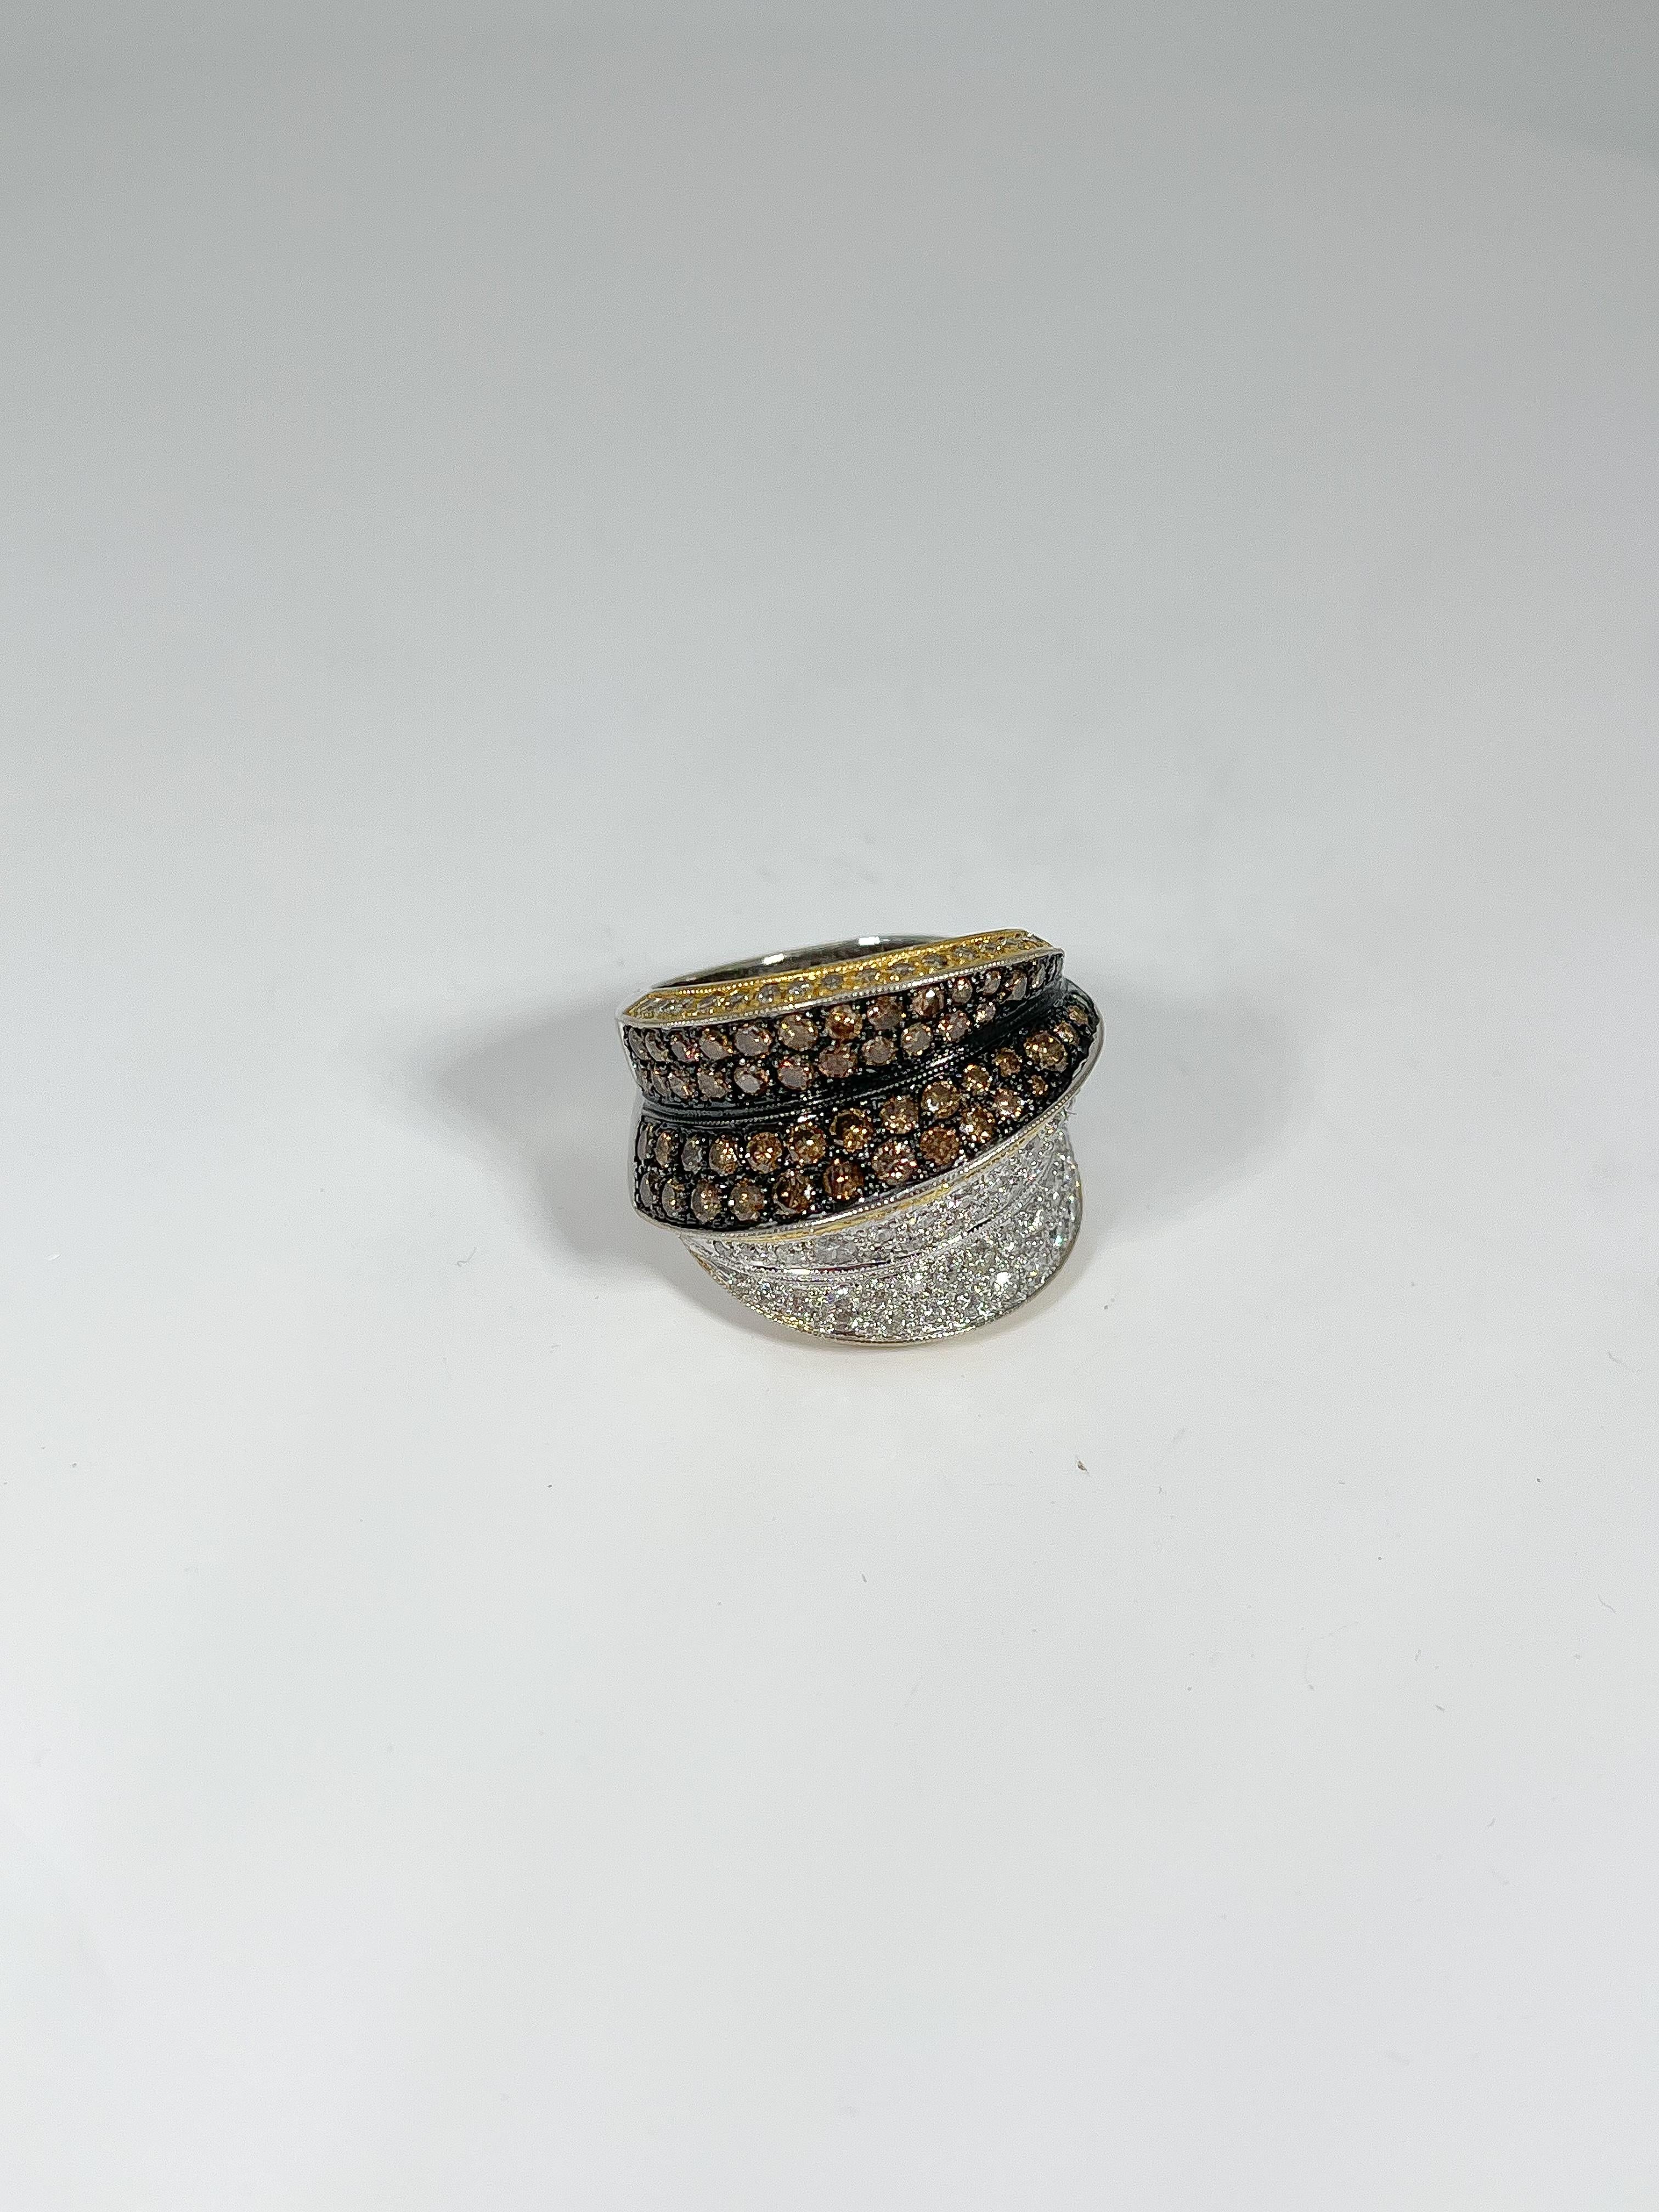 This unique two-toned cocktail ring has a black rhodium and is set with 107 white diamonds and 52 chocolate diamonds. Ring measures 19.5 mm. Fits a size 6 1/4 finger and weighs 15.56 grams.